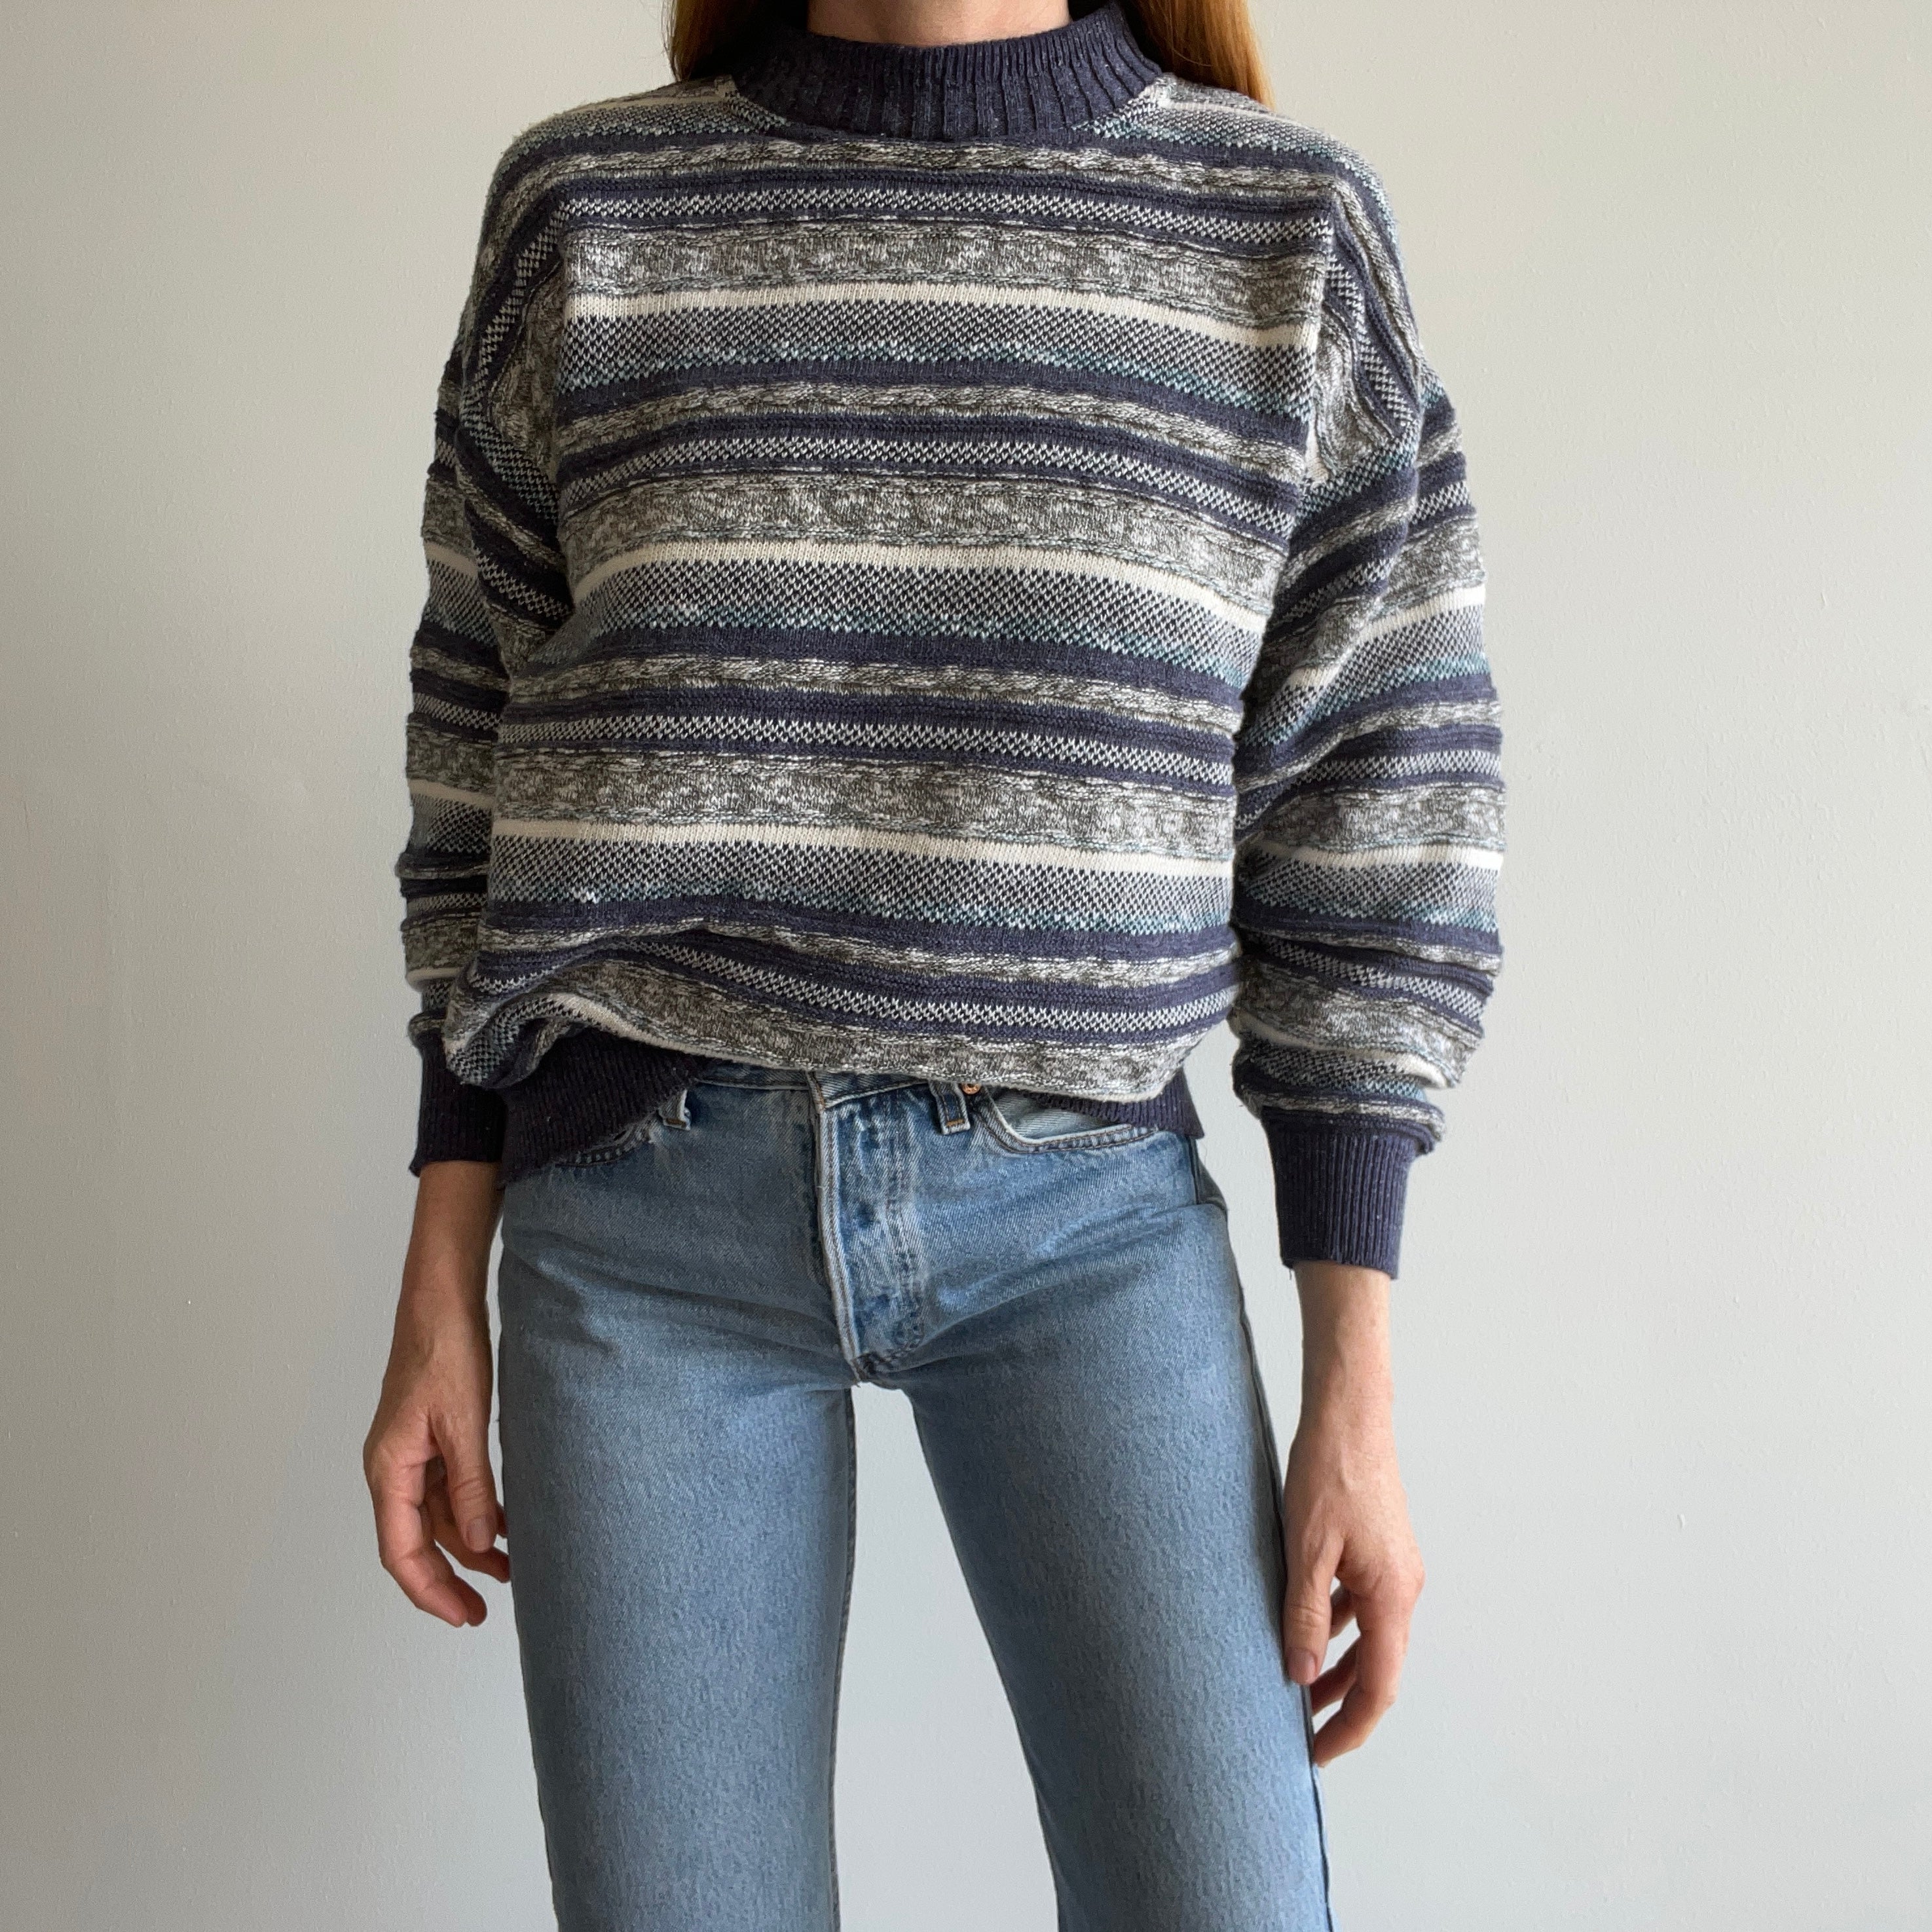 1990/2000s Cooji Style Sweater - Made in Italy, Cotton Blend